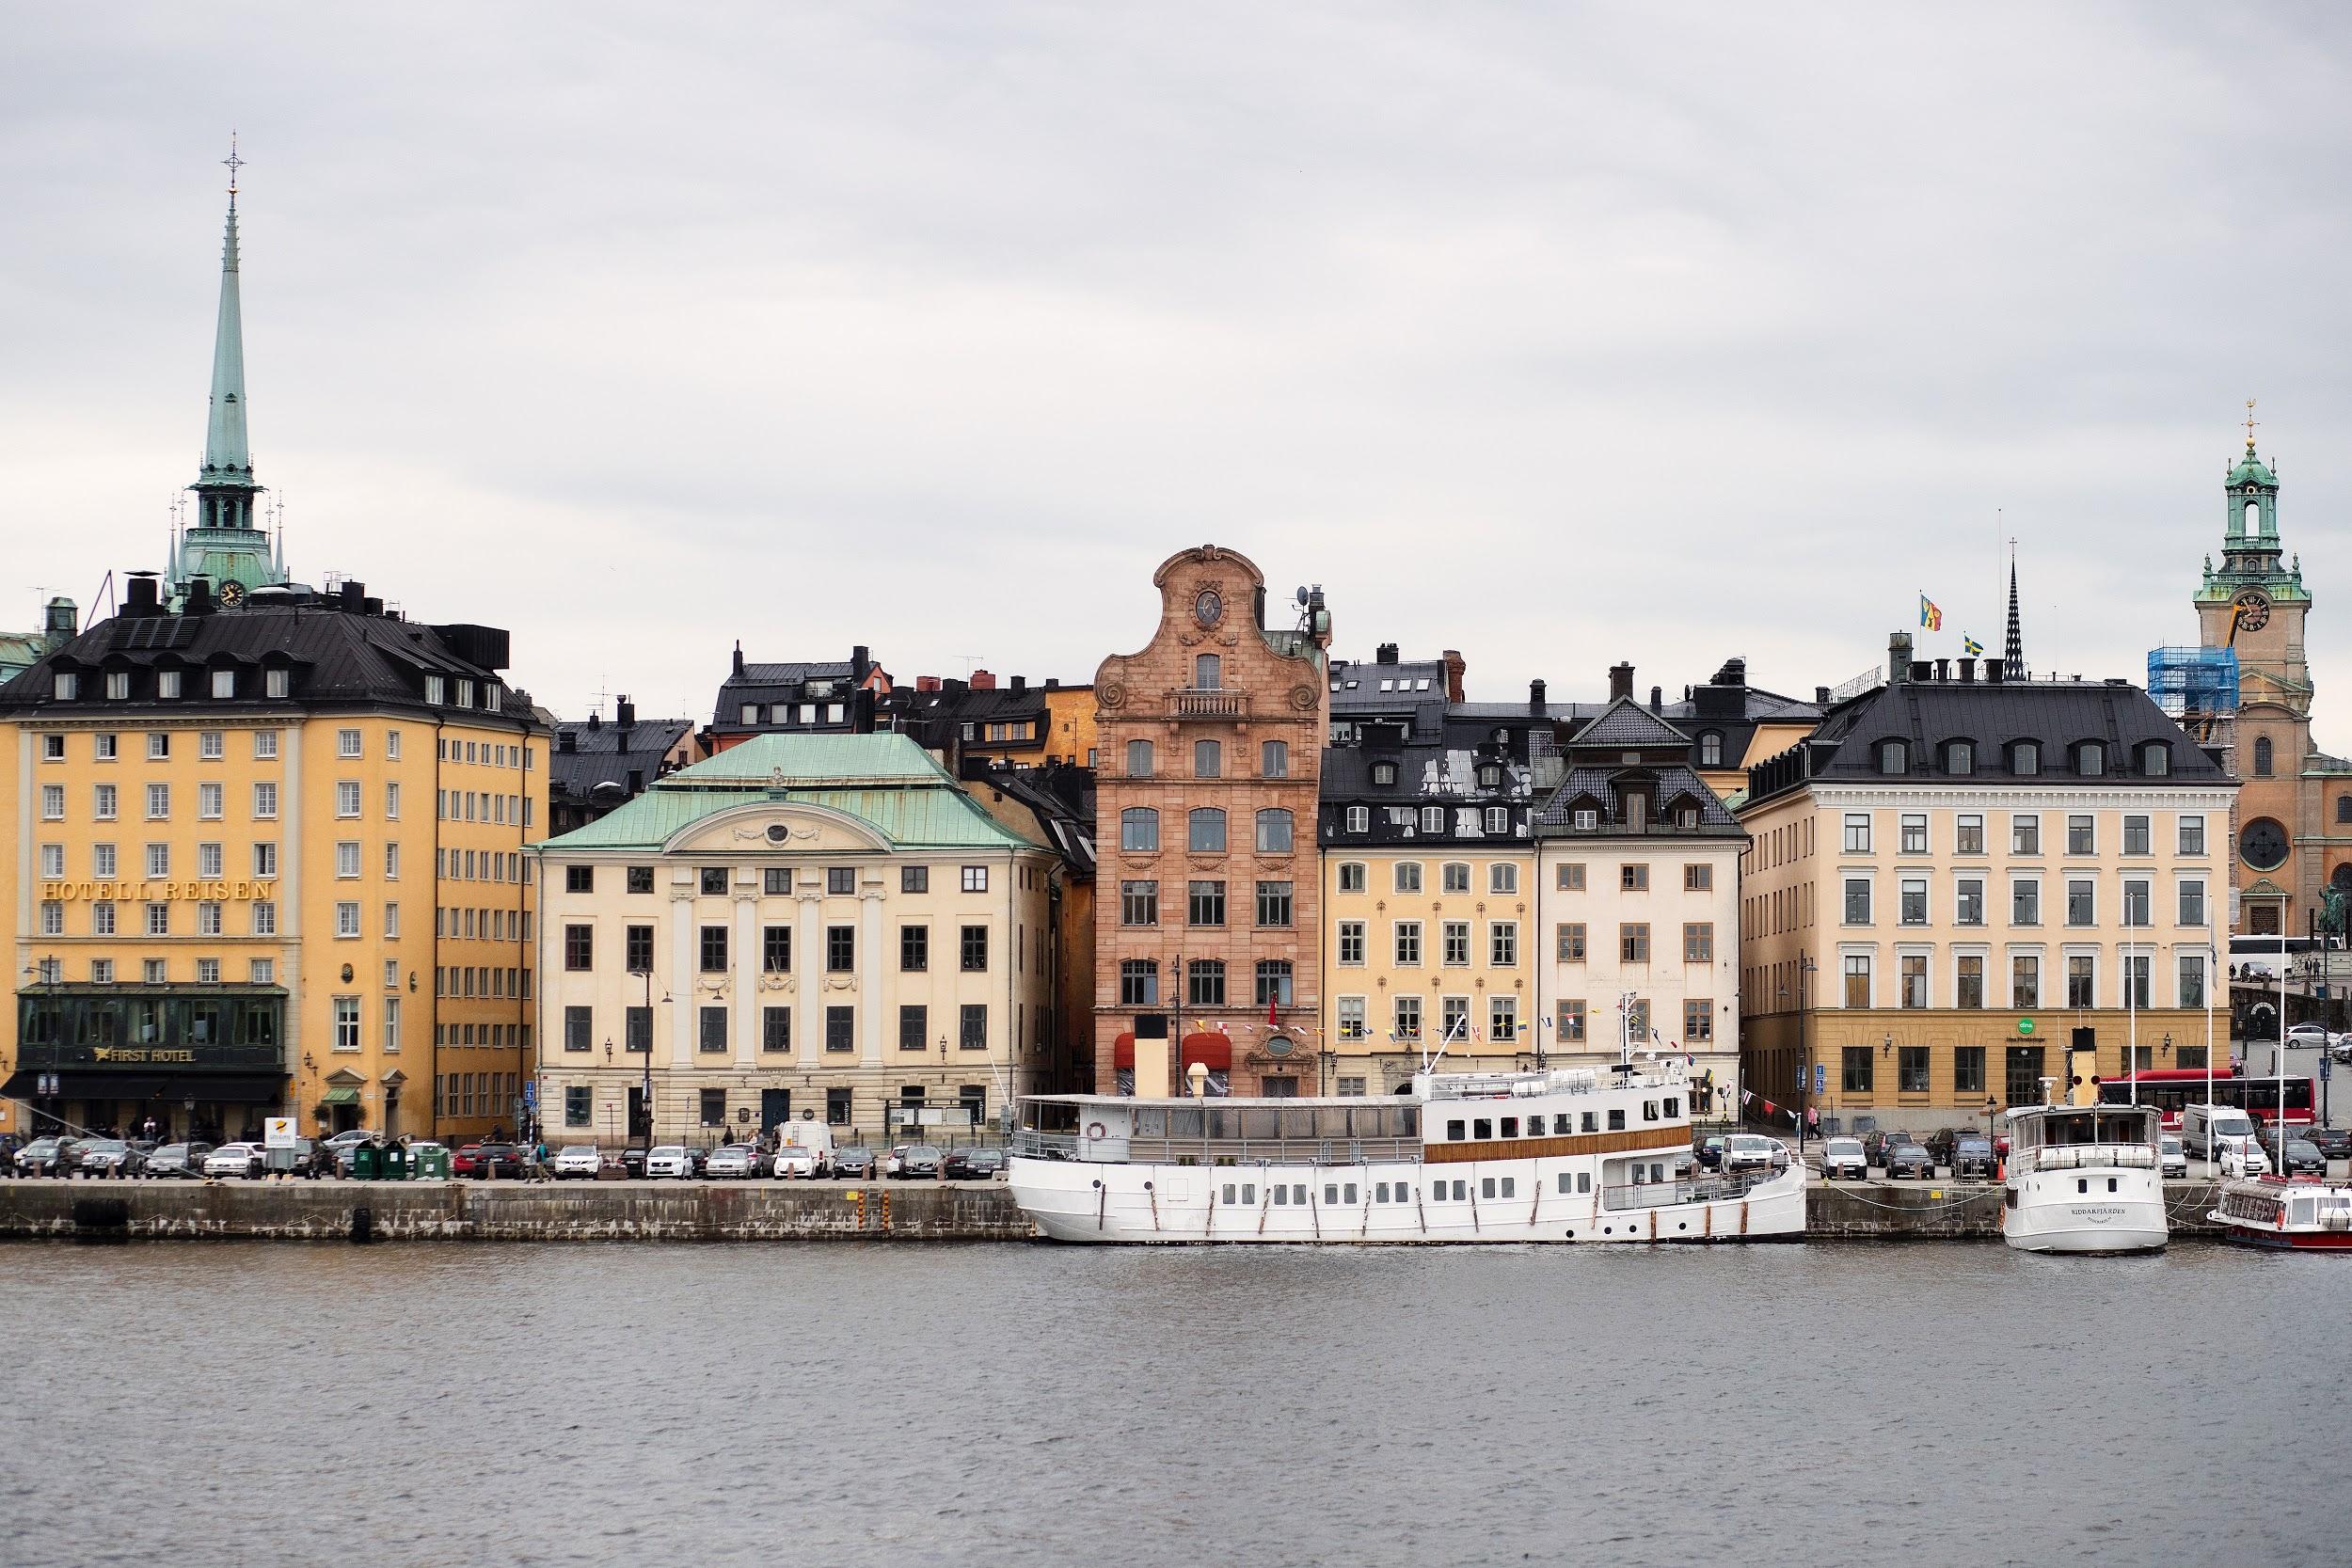 10 Reasons Why a Guided Tour Is the Best Way to Travel Scandinavia